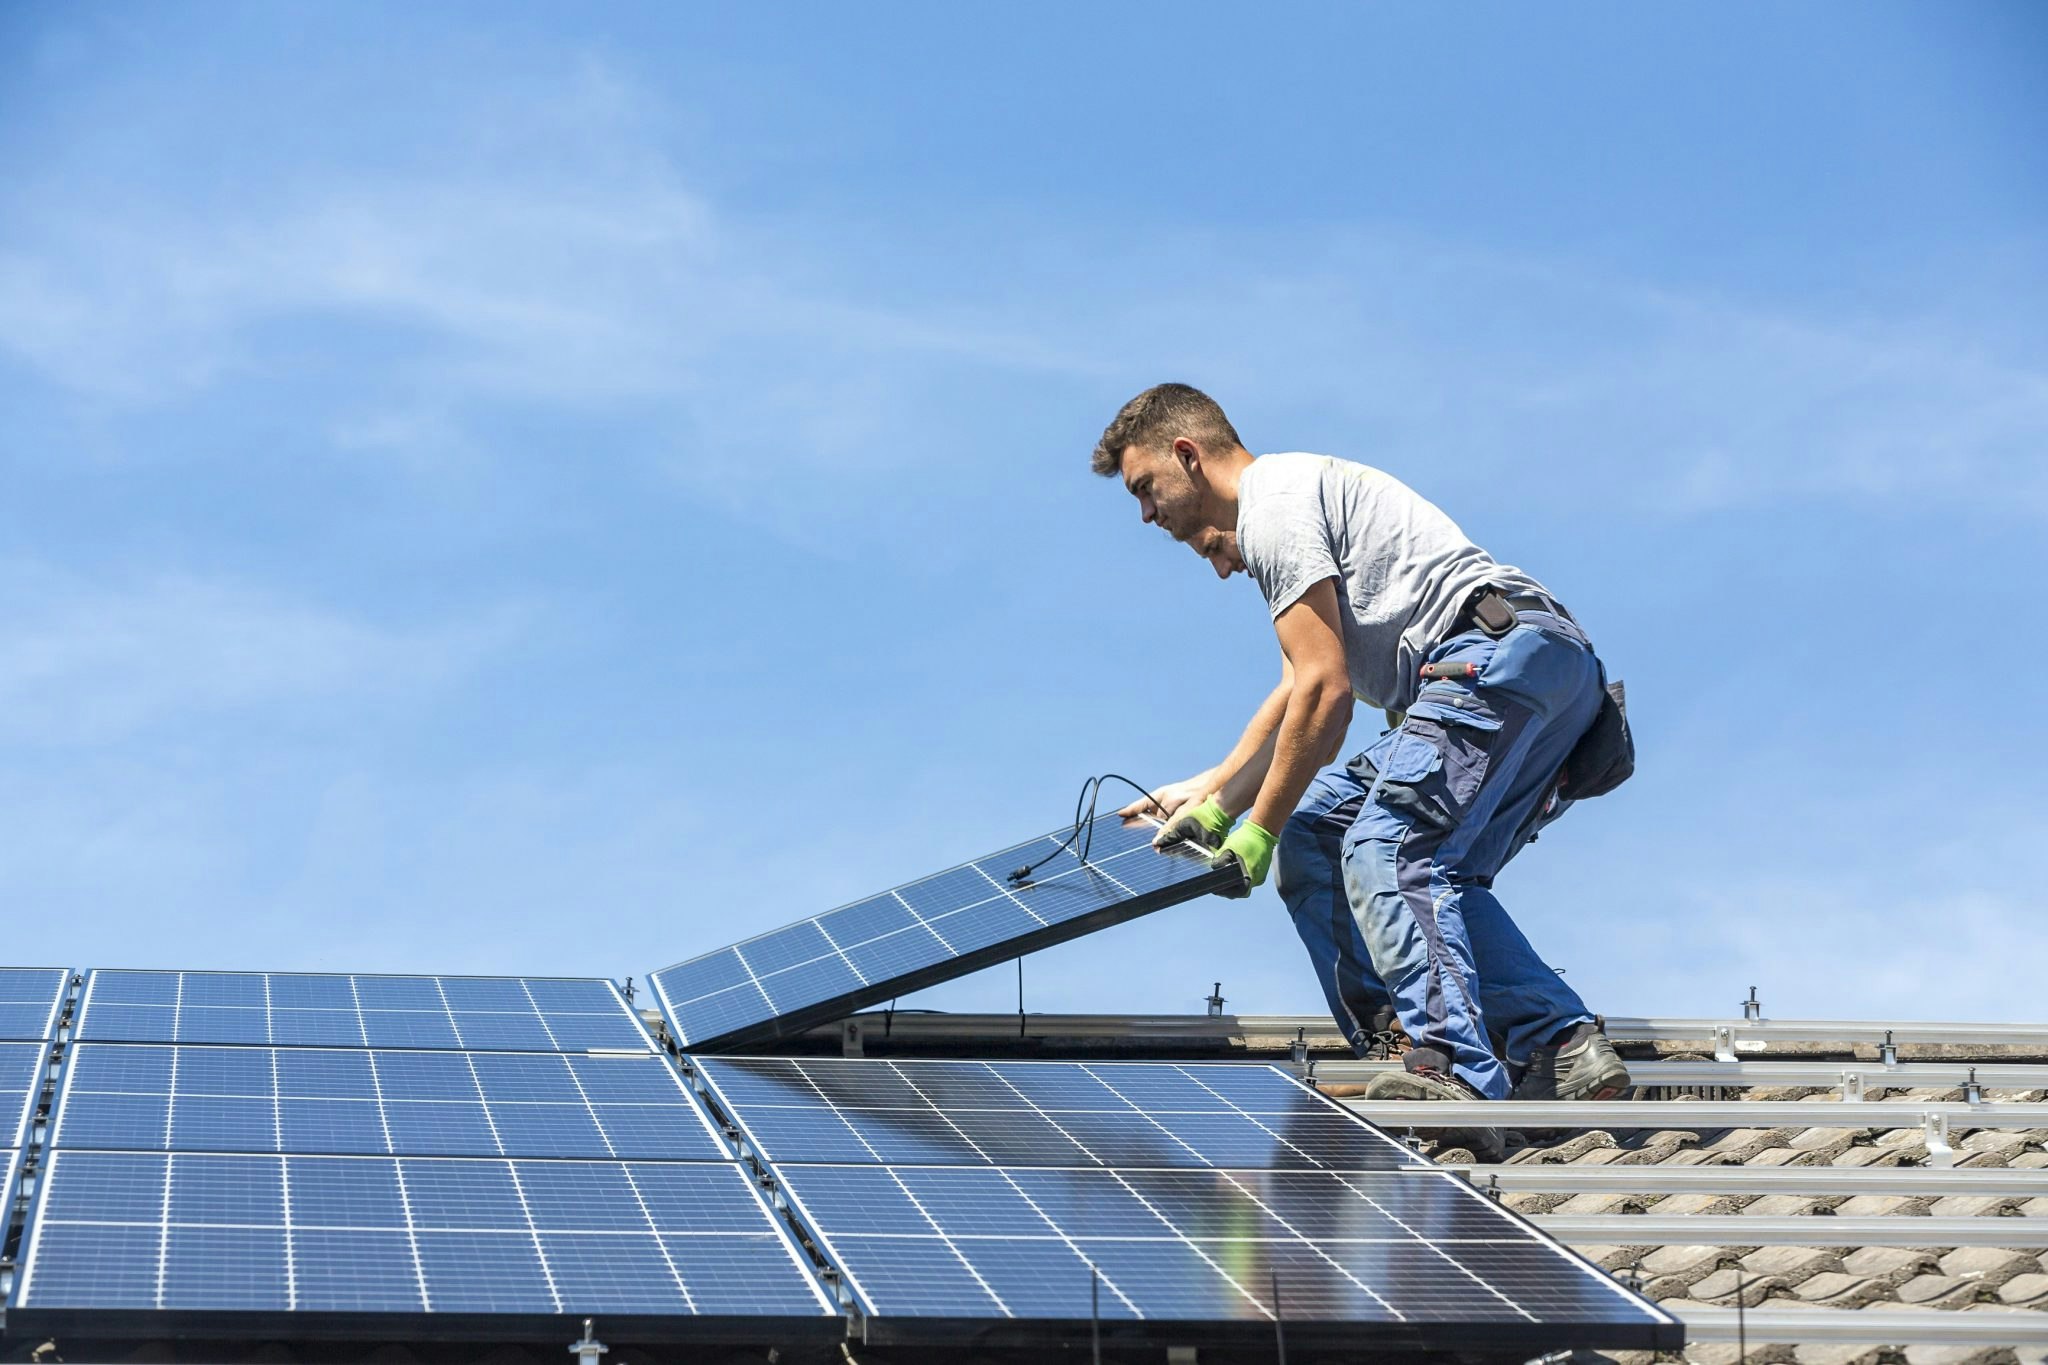 An Enpal PR photo of two men installing solar panels on a roof